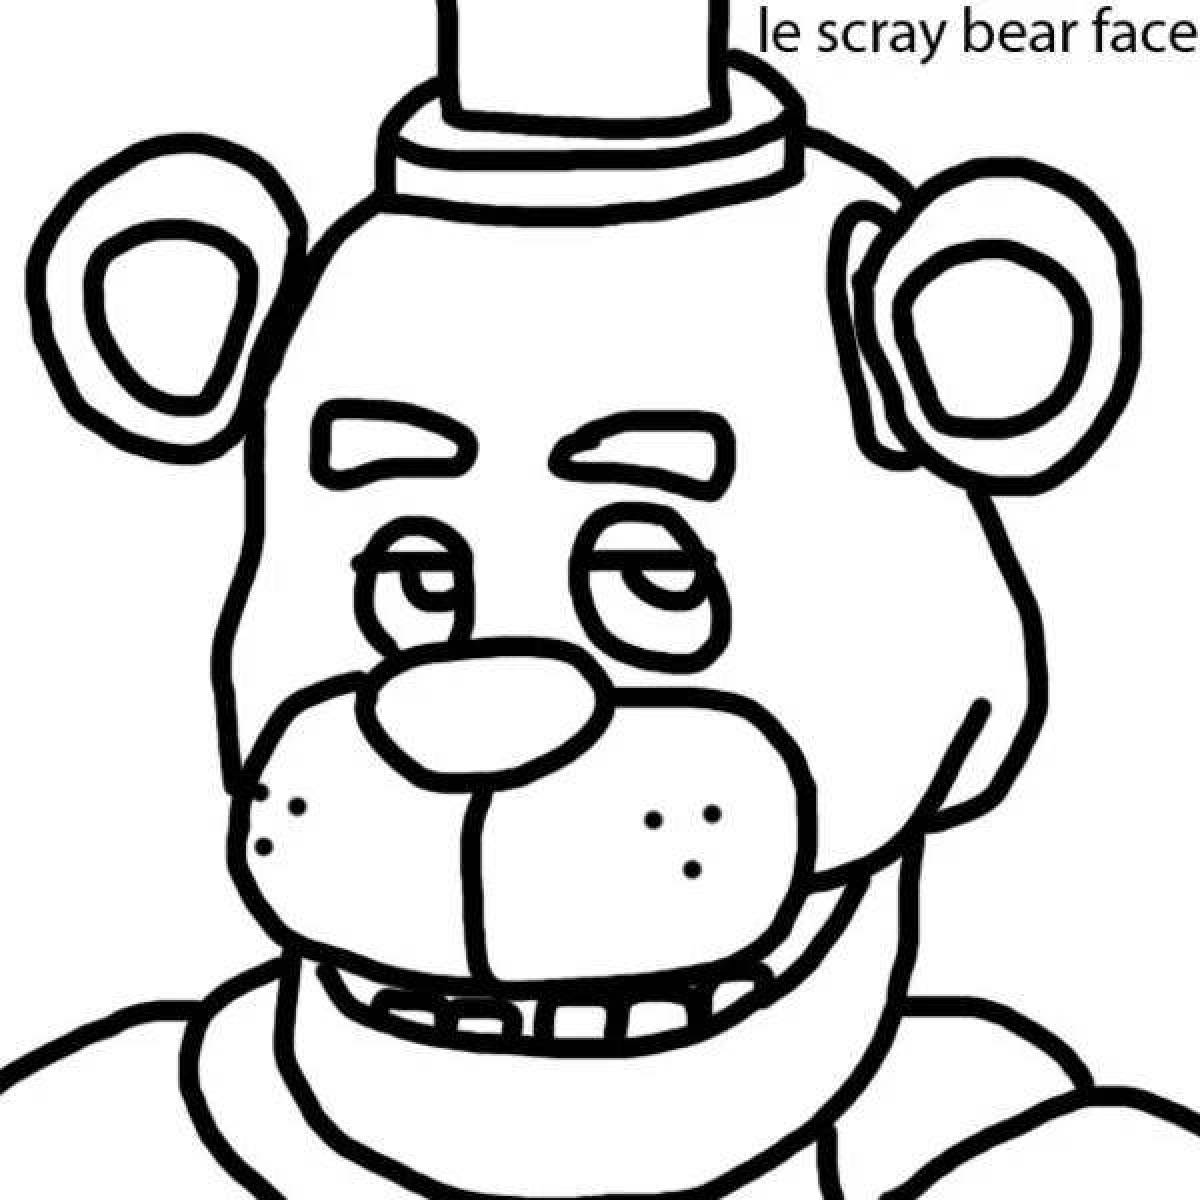 Outstanding freddy bear coloring book